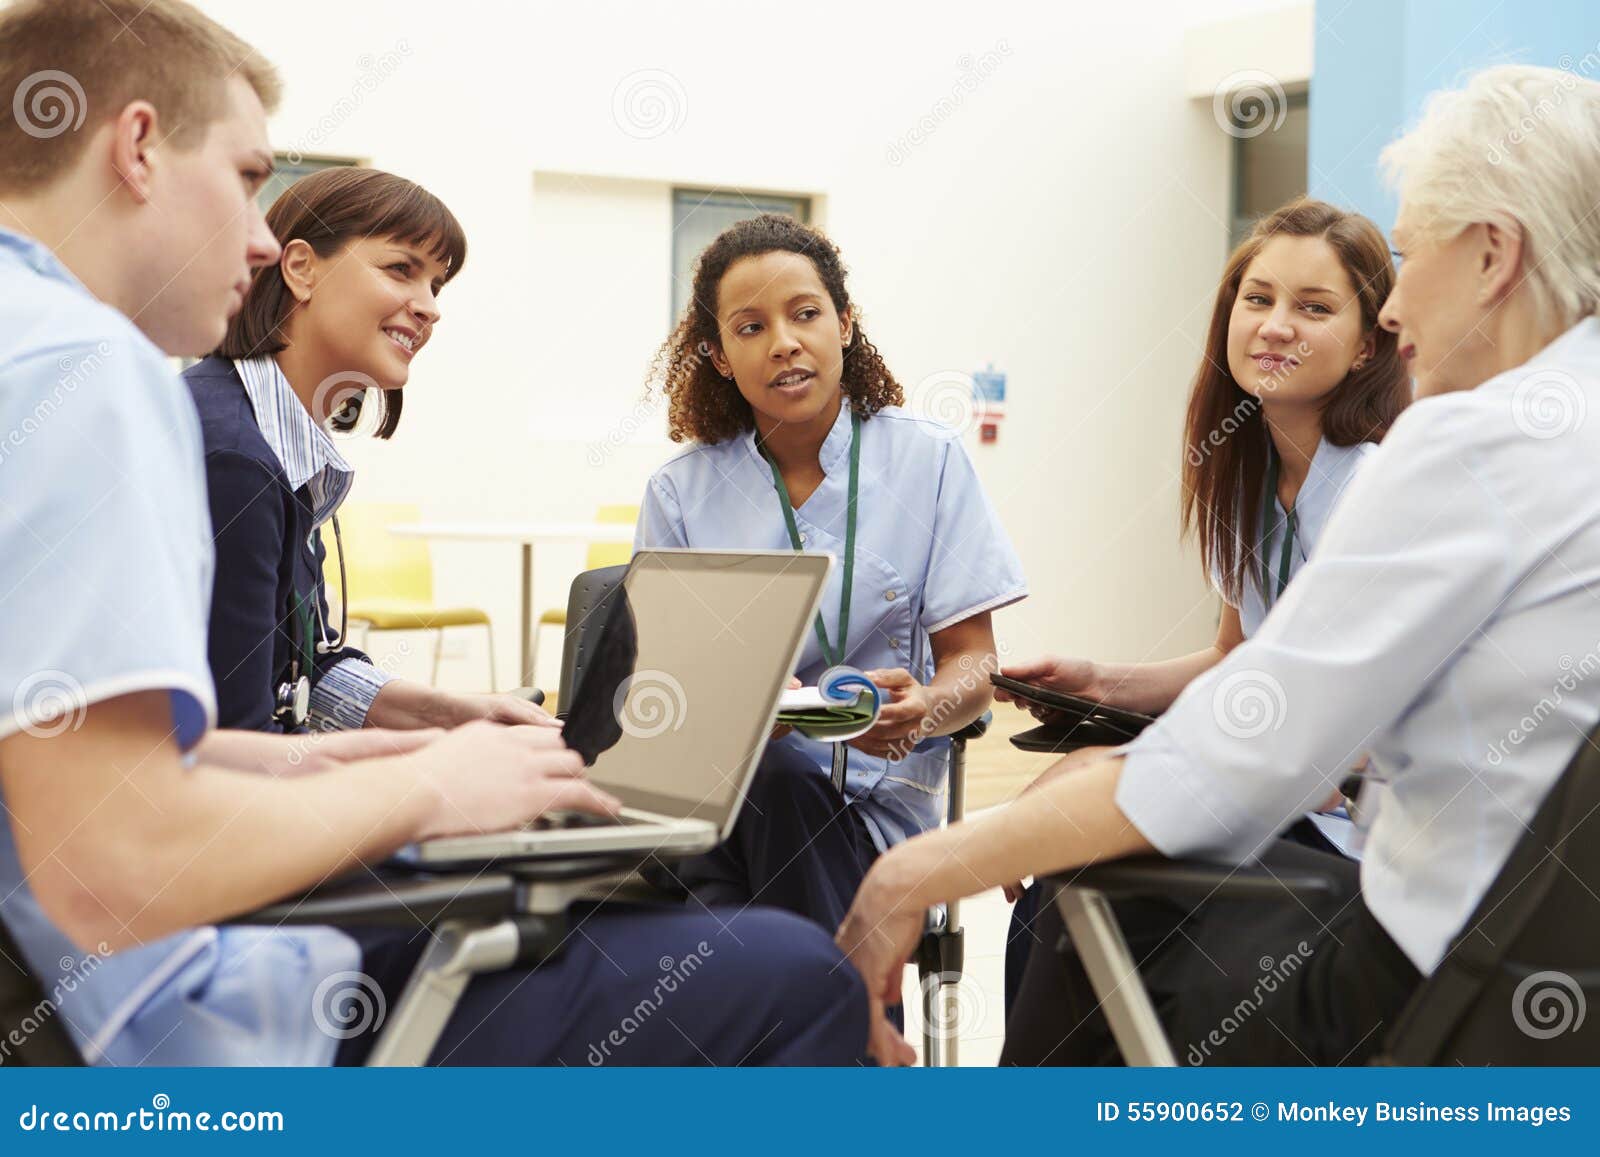 members of medical staff in meeting together